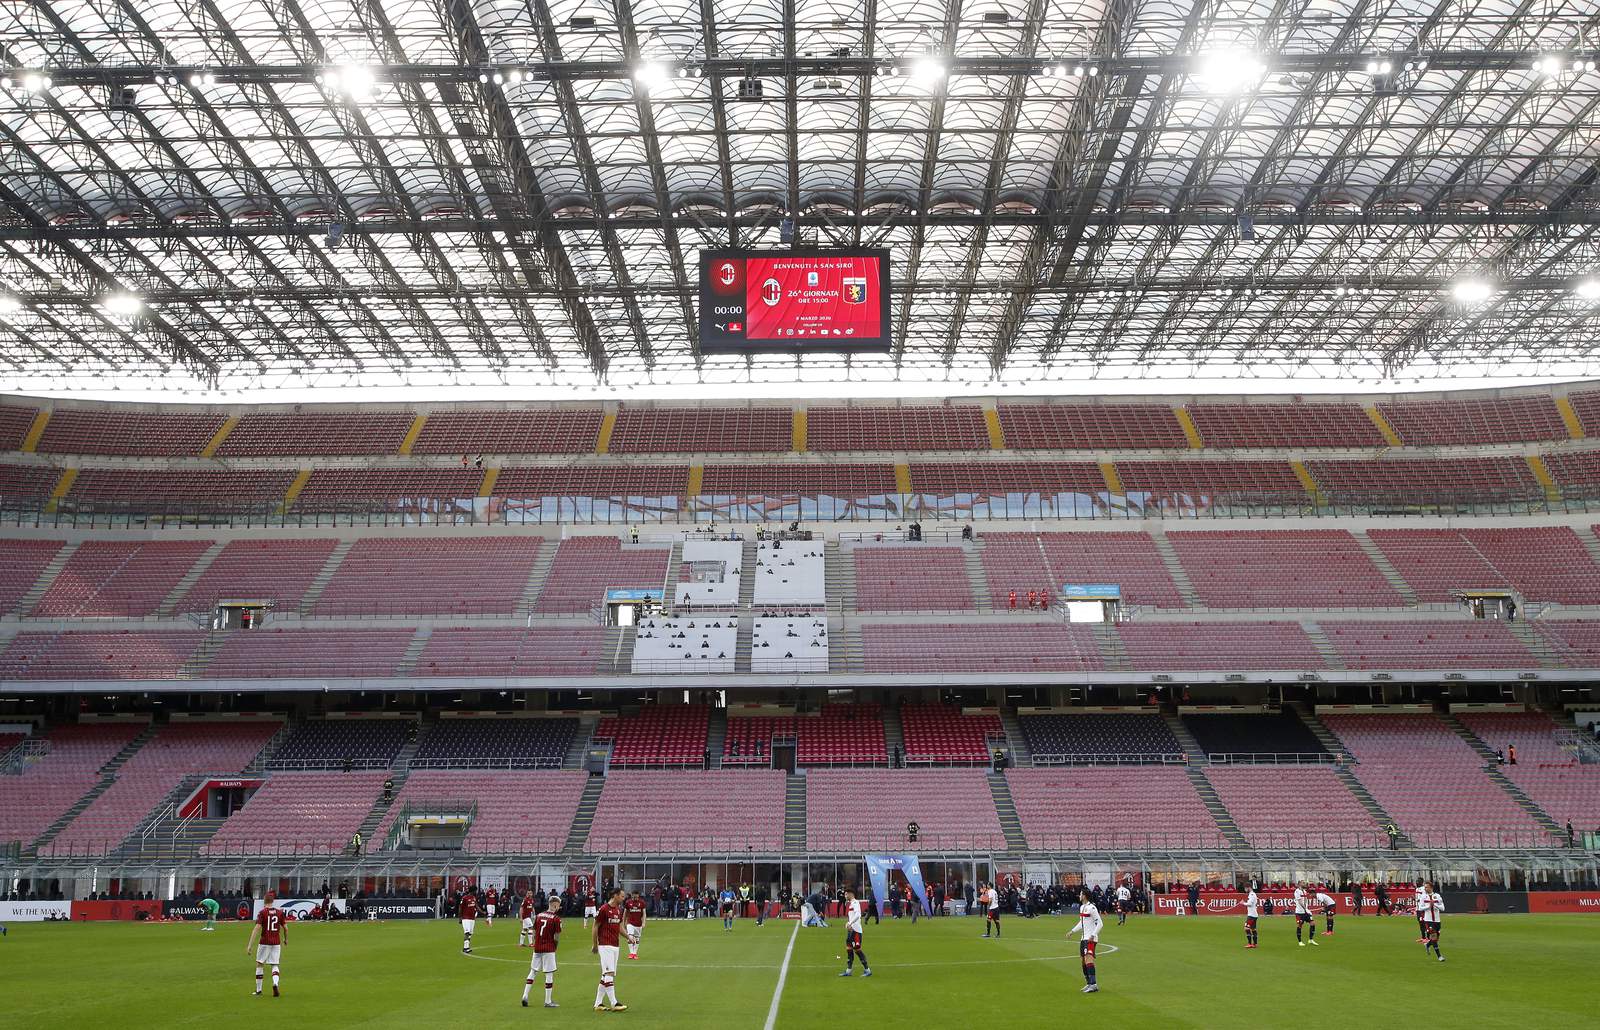 Sporting events in Italy to be halted because of virus